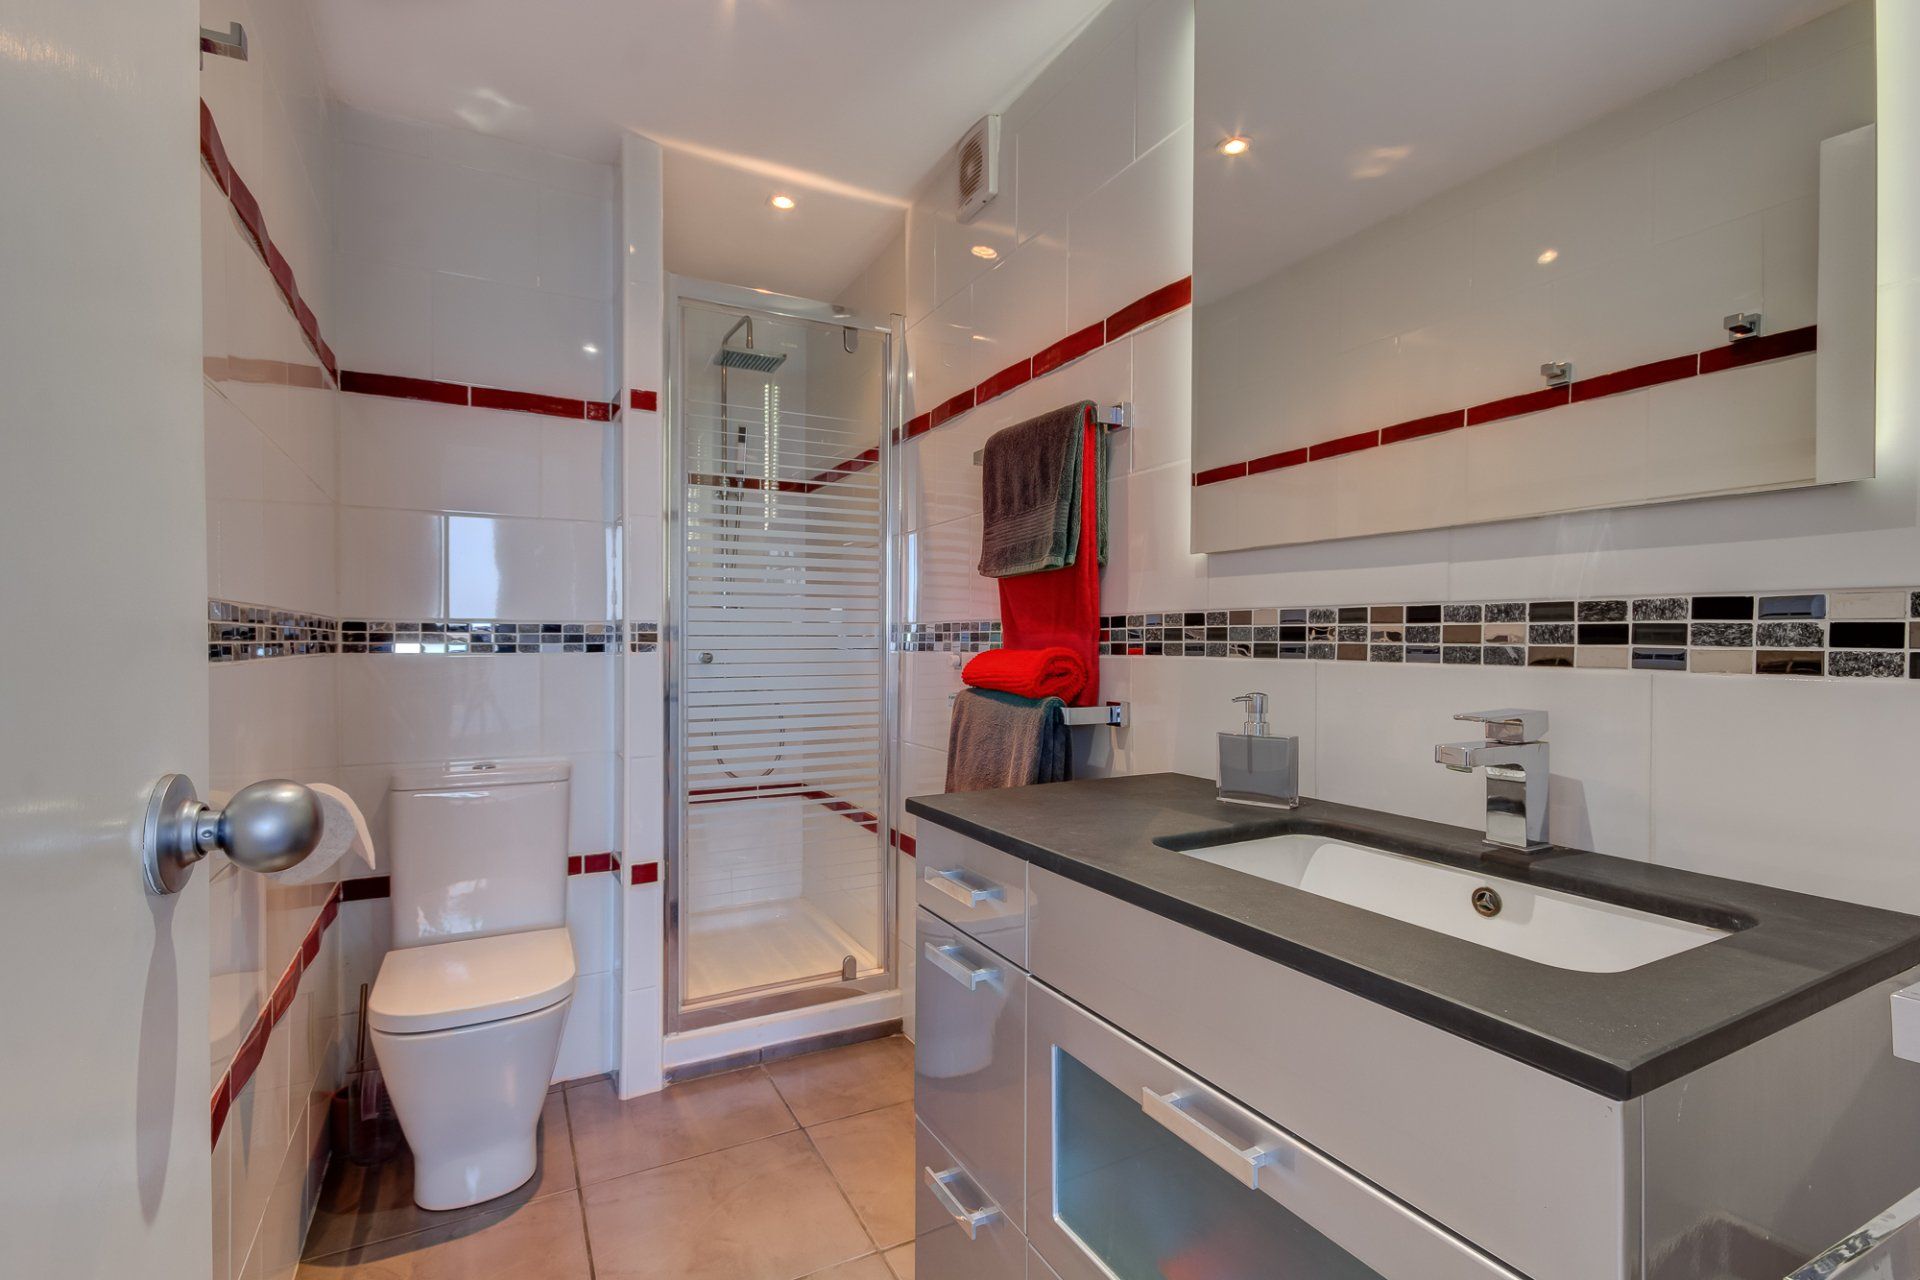 stylish and modern bathroom with white shiney tiles with red detailing and shower cubicle